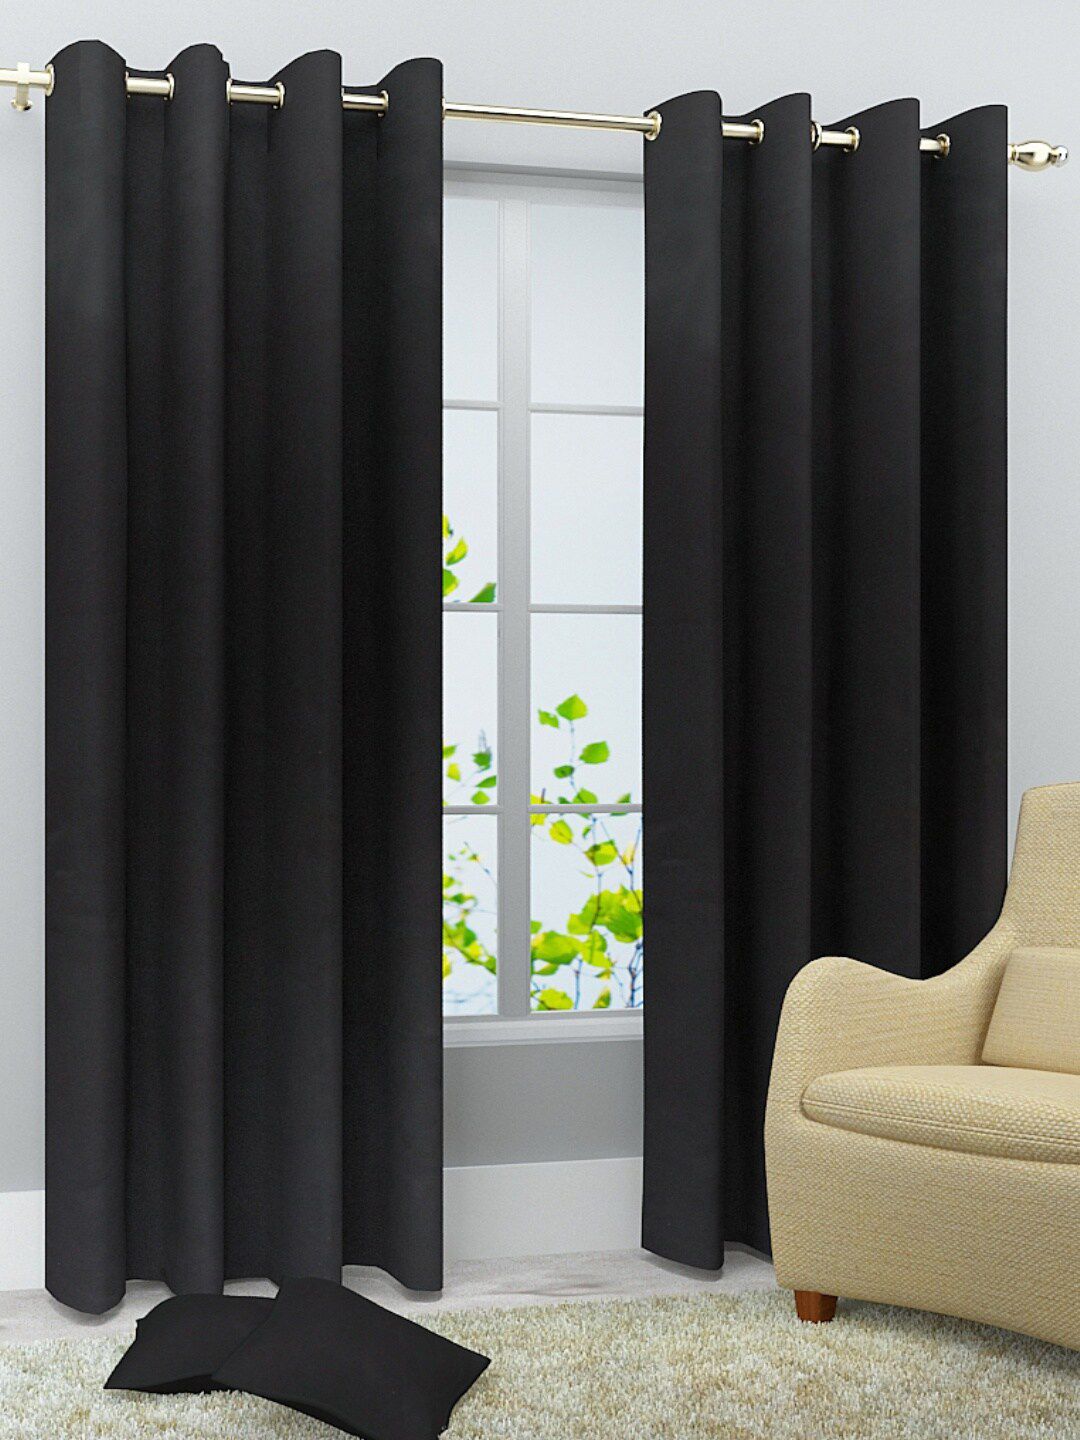 Homefab India Black Set of 2 Window Curtains Price in India